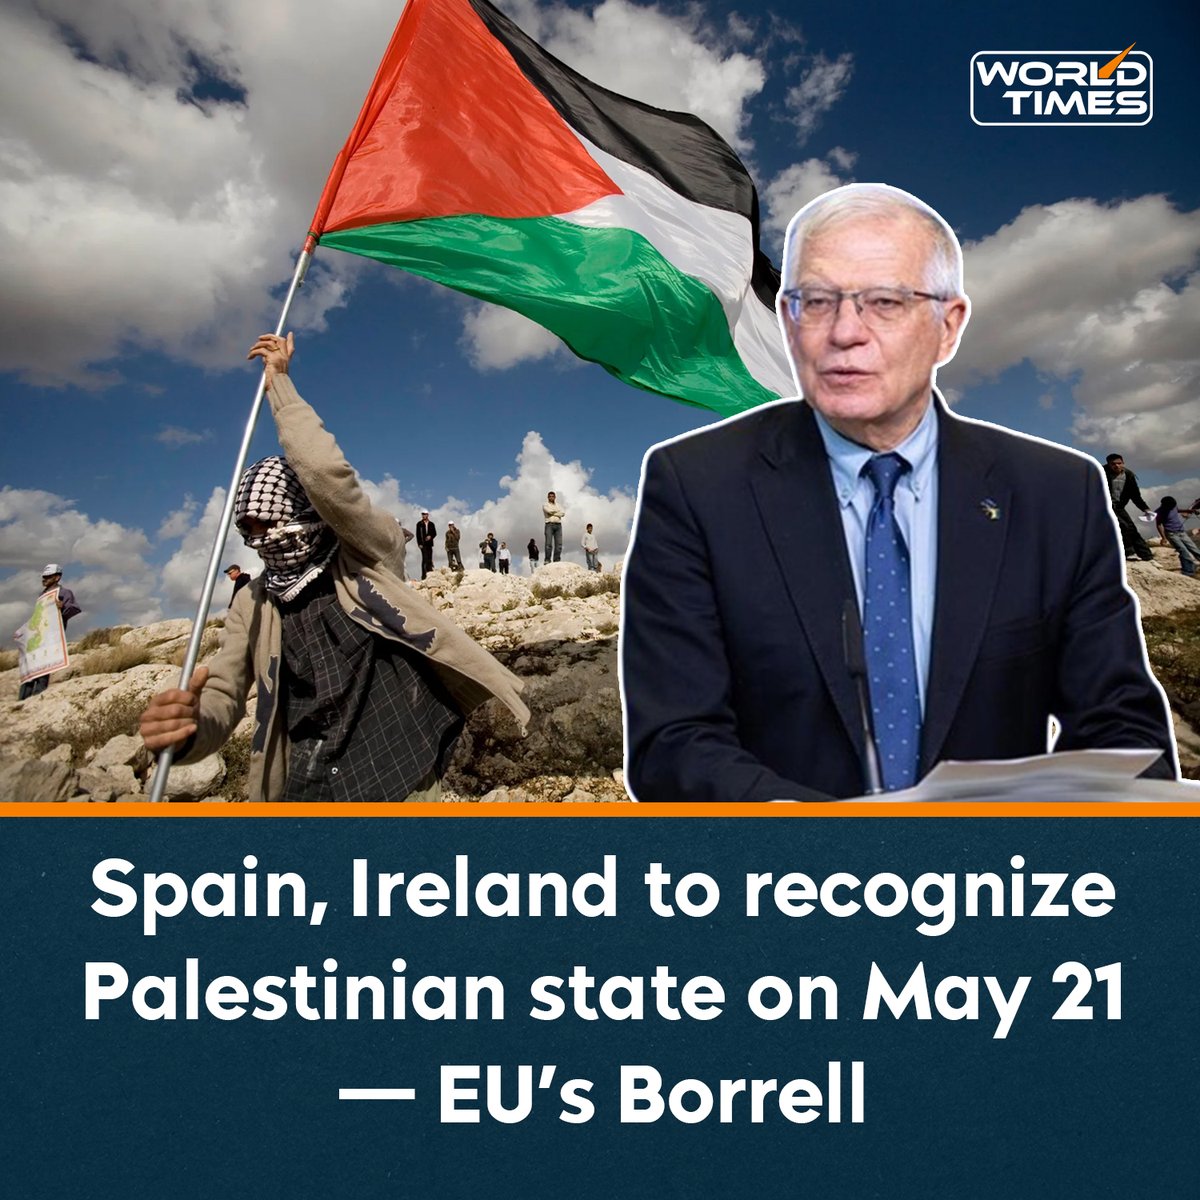 Spain, Ireland and other European Union member countries plan to recognize a Palestinian state on May 21, the EU’s foreign policy chief, Josep Borrell, said late on Thursday ahead of an expected UN vote on Friday on a Palestinian bid to become a full member.